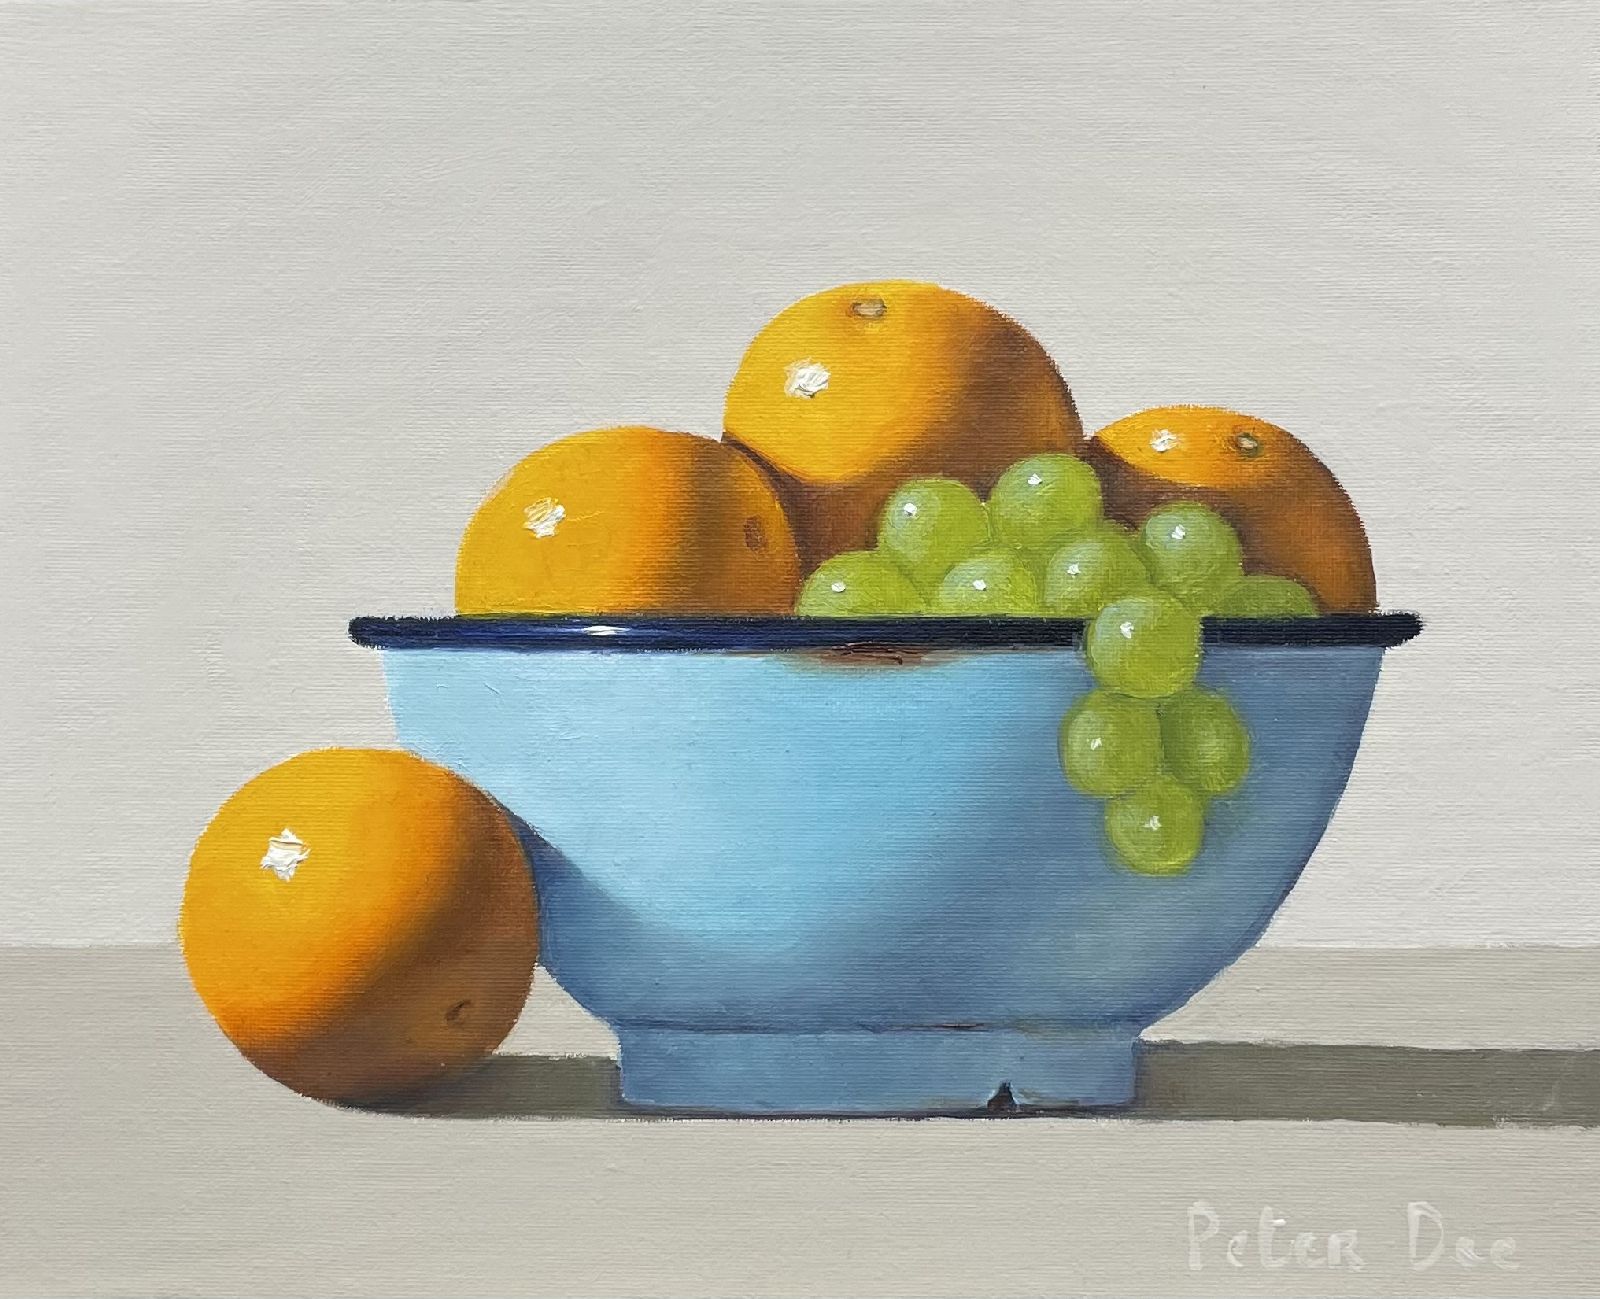 Peter Dee - Oranges and Grapes in Turquoise Bowl